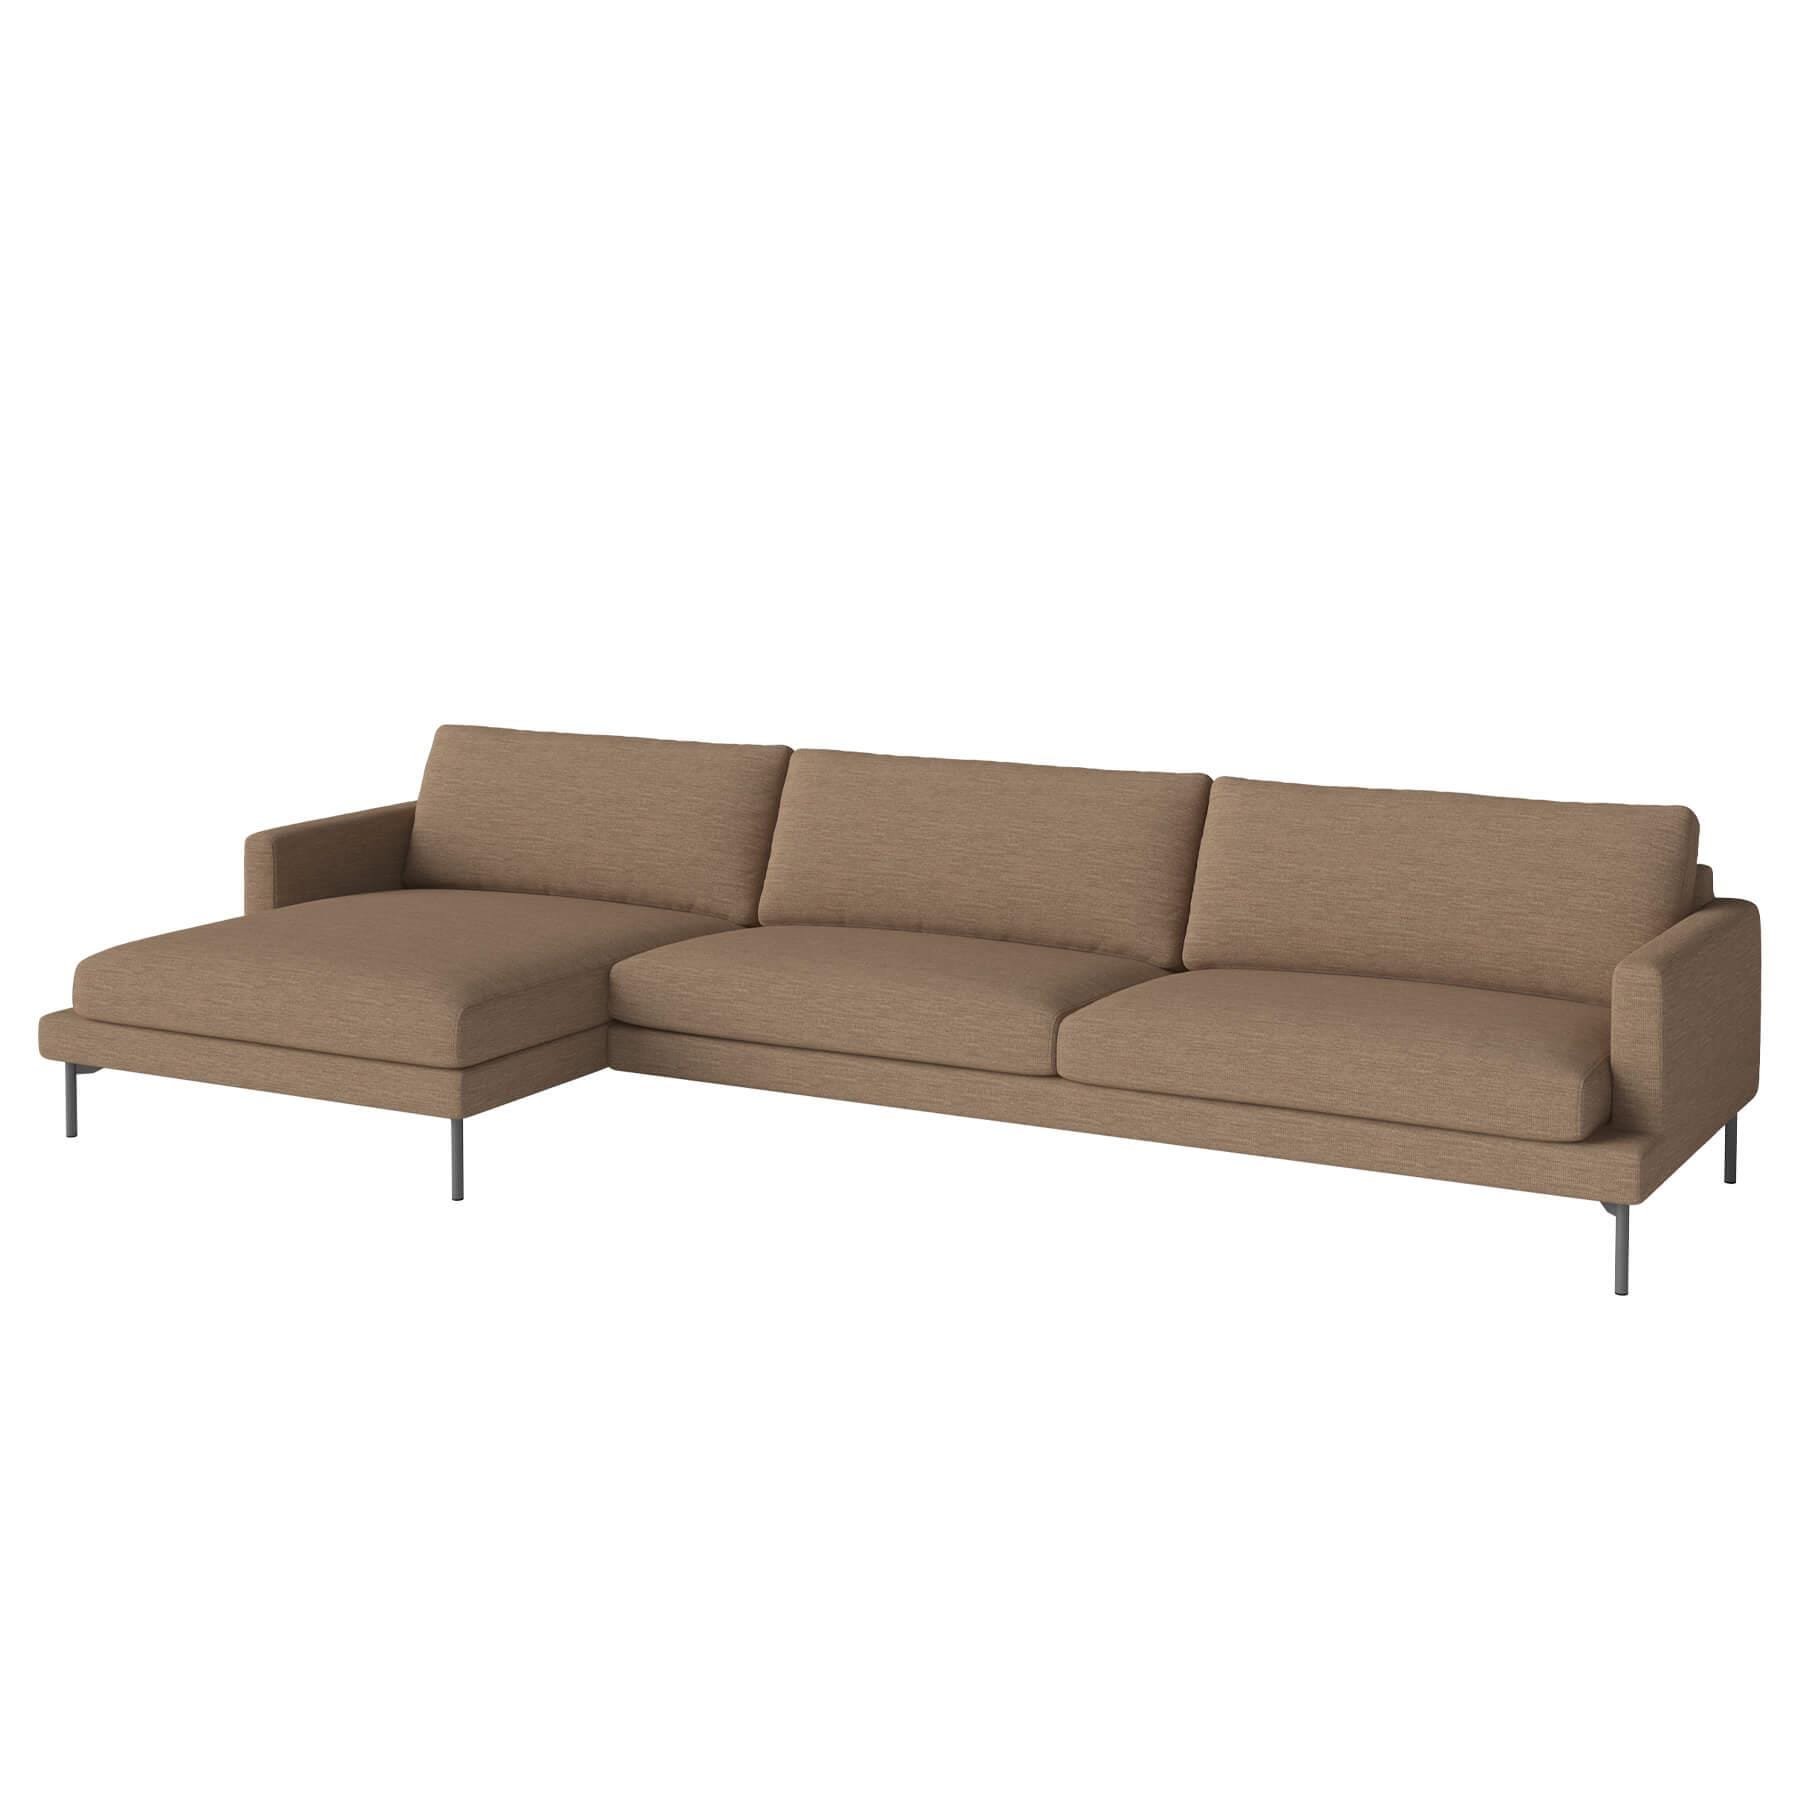 Bolia Veneda Sofa 45 Seater Sofa With Chaise Longue Grey Laquered Steel Laine Light Brown Left Brown Designer Furniture From Holloways Of Ludlow